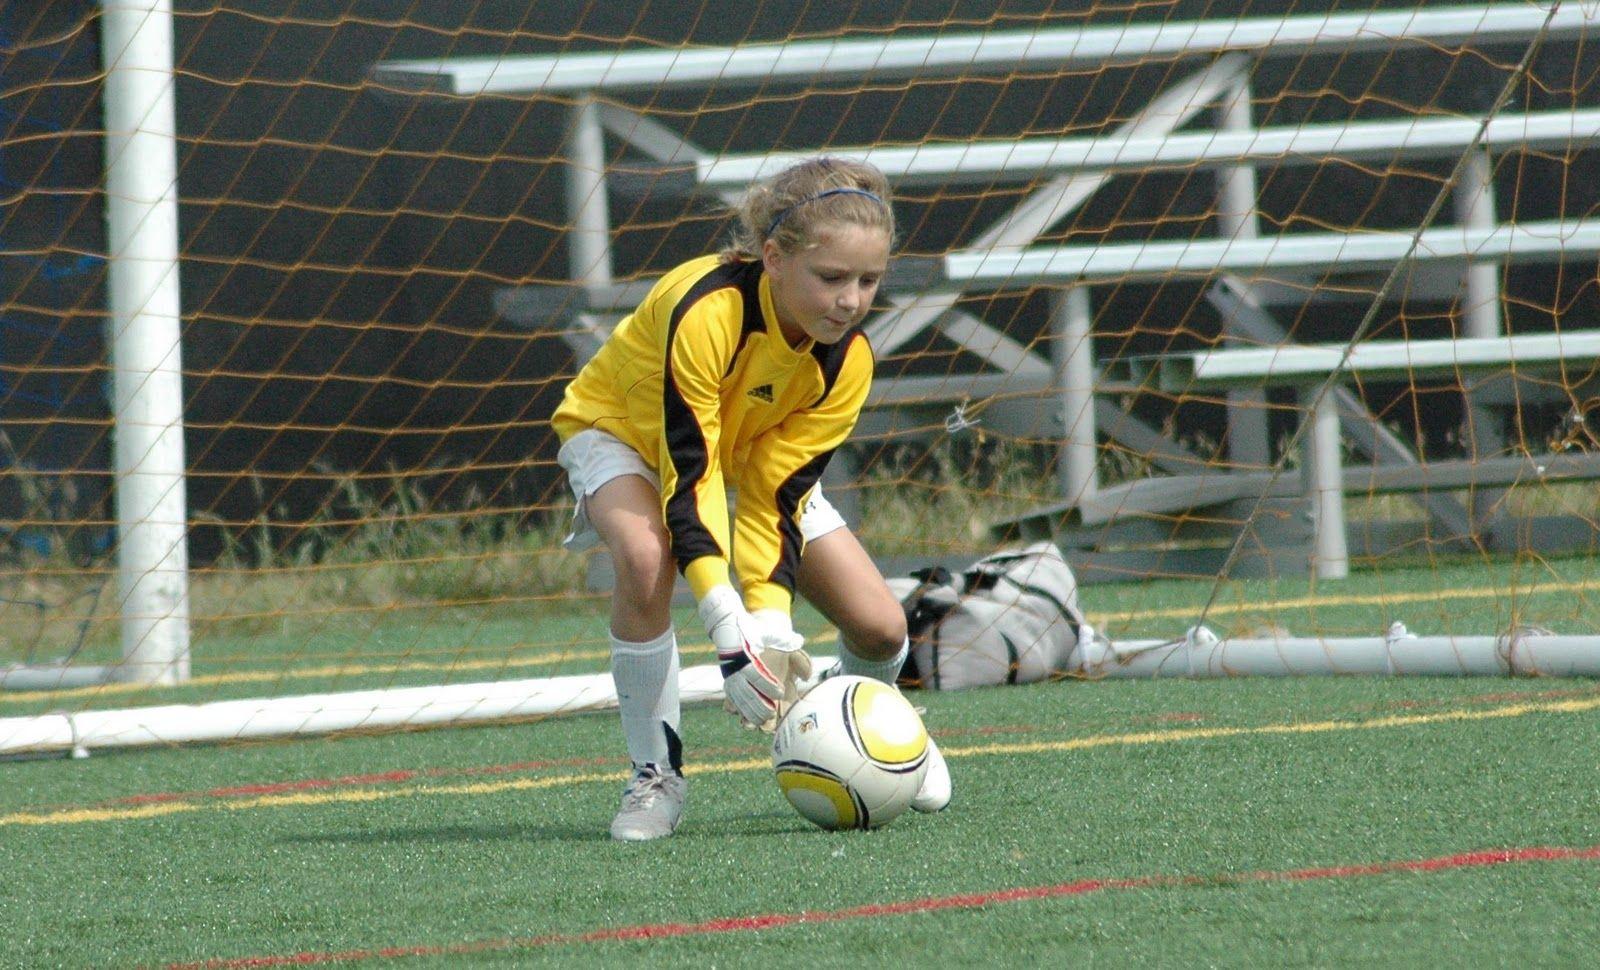 STATS DAD: Youth Soccer: The Pressure of Playing Goalie